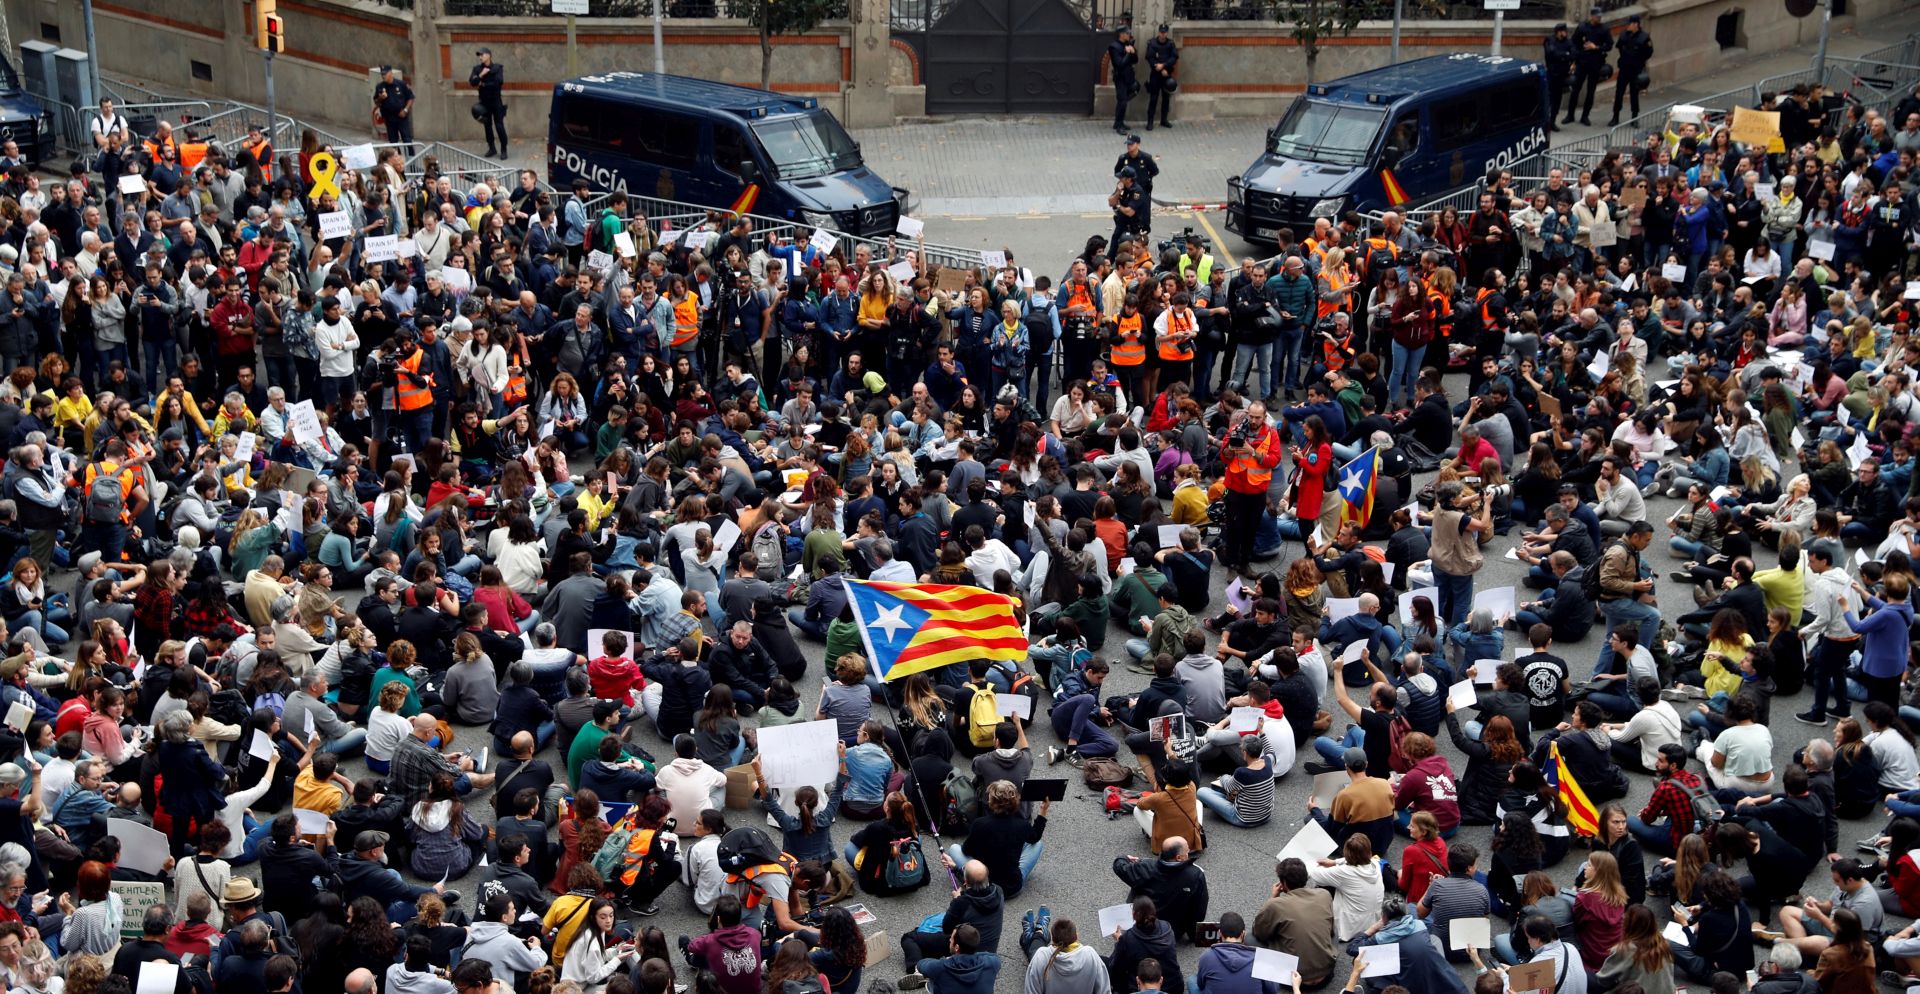 epa07938432 Protesters hold banners as they attend a sit-in protest outside Central Government's Headquarters in Catalonia, amid the visit of acting Spanish Prime Minister Sanchez, in Barcelona, Spain, 21 October 2019. The rally, called by the group Tsunami Democratic, is held in the framework of the Sanchez' s visit to the security forces officers who were admitted to hospitals in Barcelona after they were wounded in the riots in Barcelona. Catalonia region in Spain witnessed massive demonstrations and riots since the Spanish Supreme Court's 13 October ruling of prison terms against the Catalan political leaders accused of organizing the Catalan illegal referendum held in October 2017.  EPA/Toni Albir